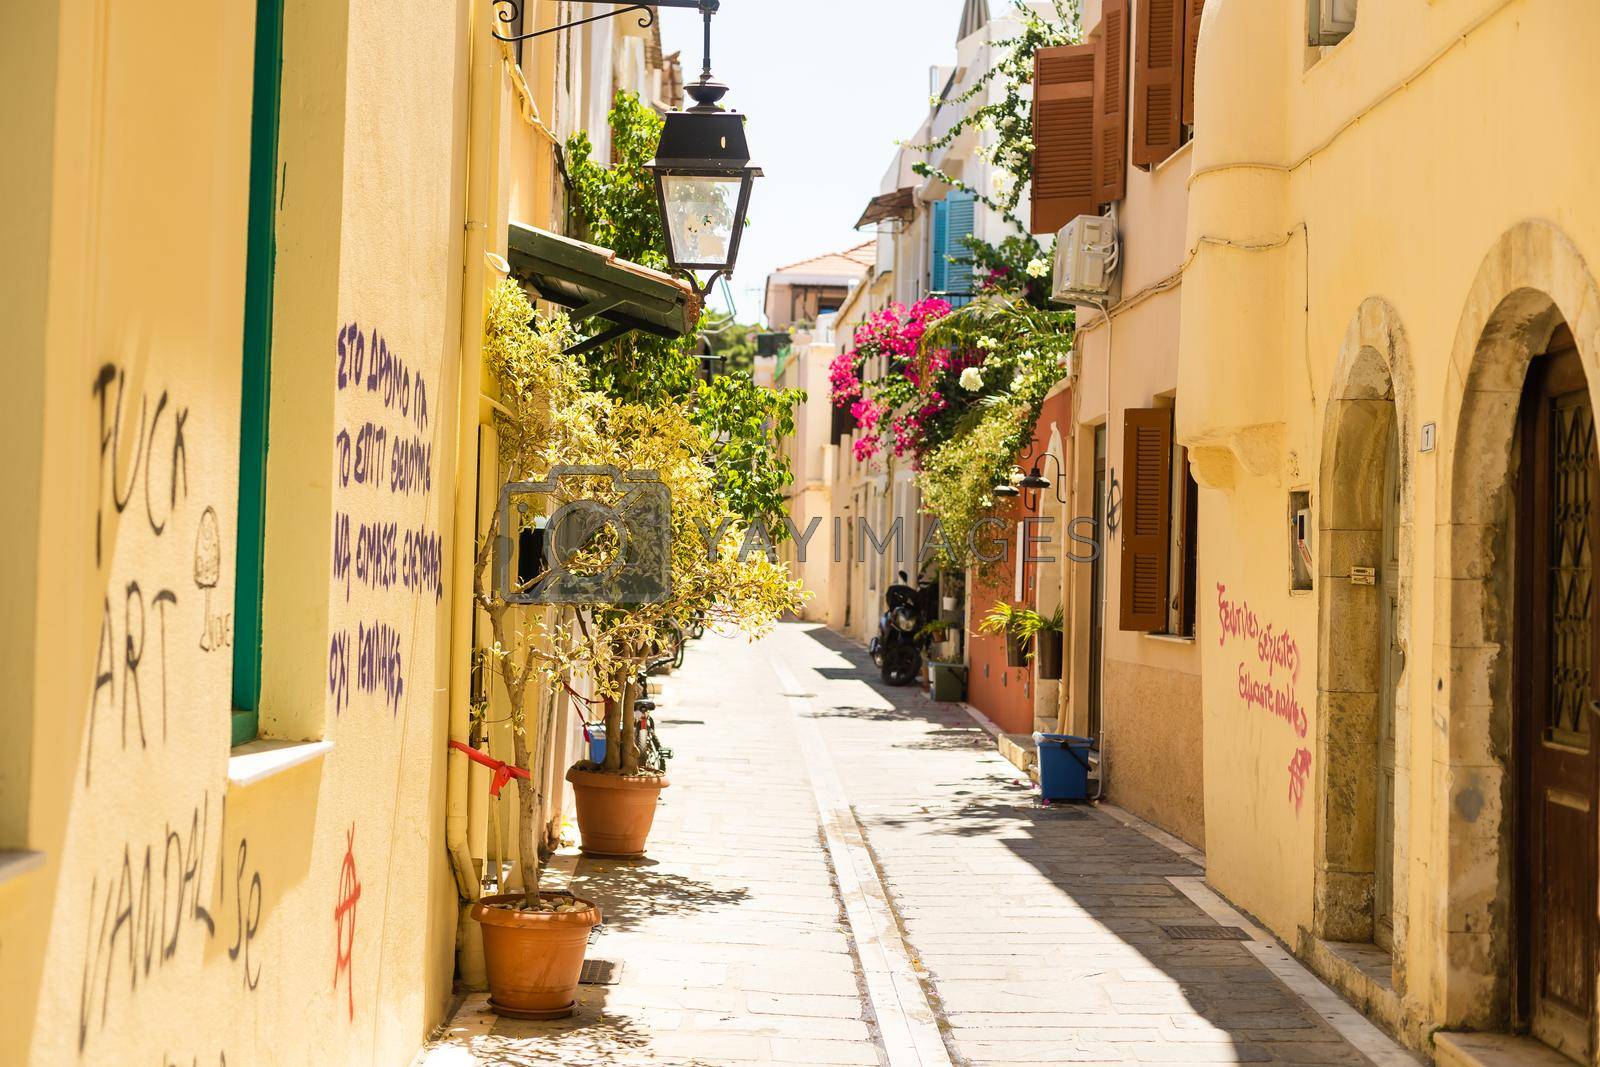 Rethymno Greece Crete. Walk around the old resort town Rethymno in Greece. Architecture and Mediterranean attractions on island Crete. Narrow touristic street in the tourist routes.